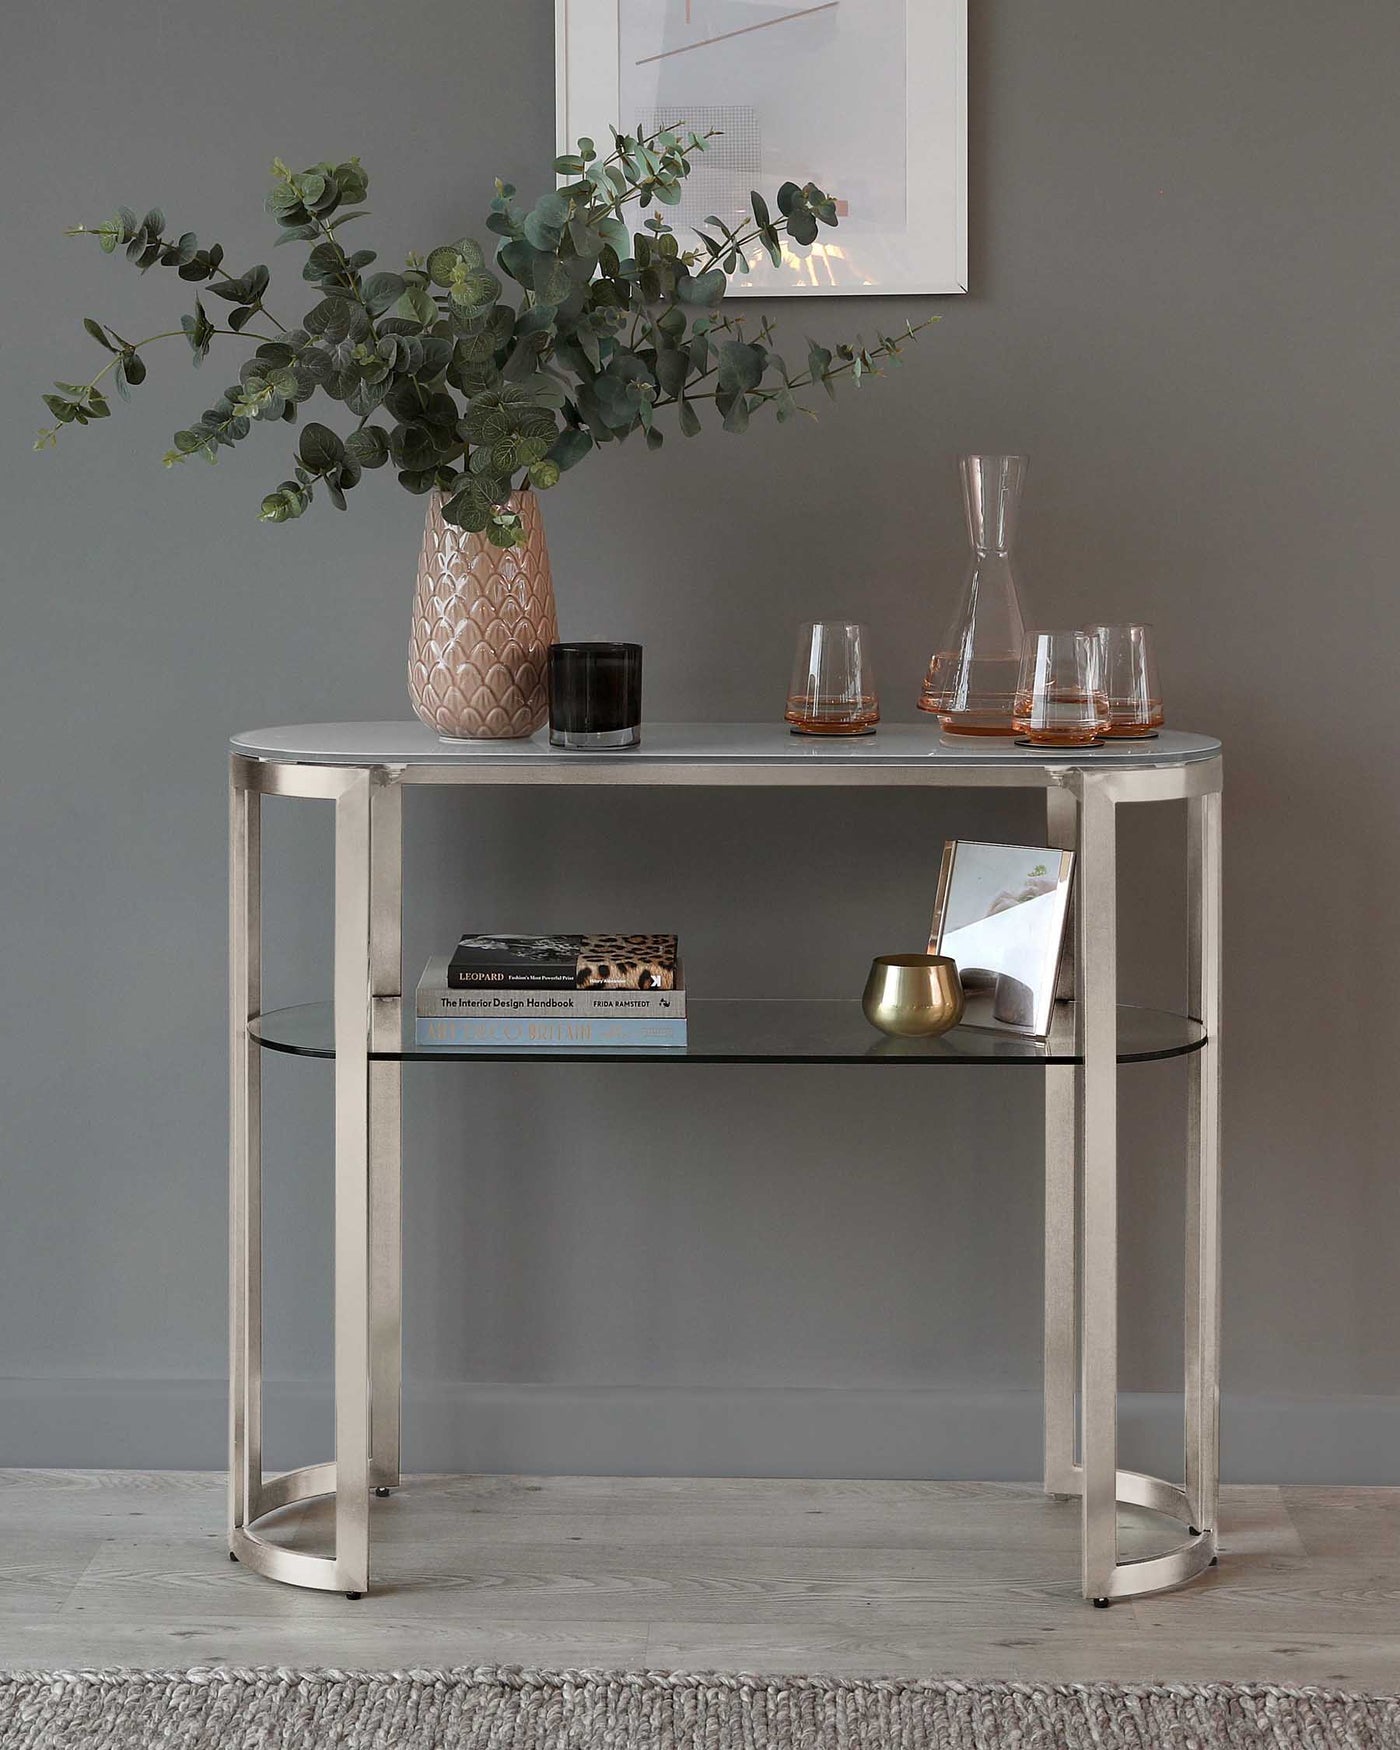 Elegant, modern half-moon console table with a polished metal frame and two-tiered glass shelves.